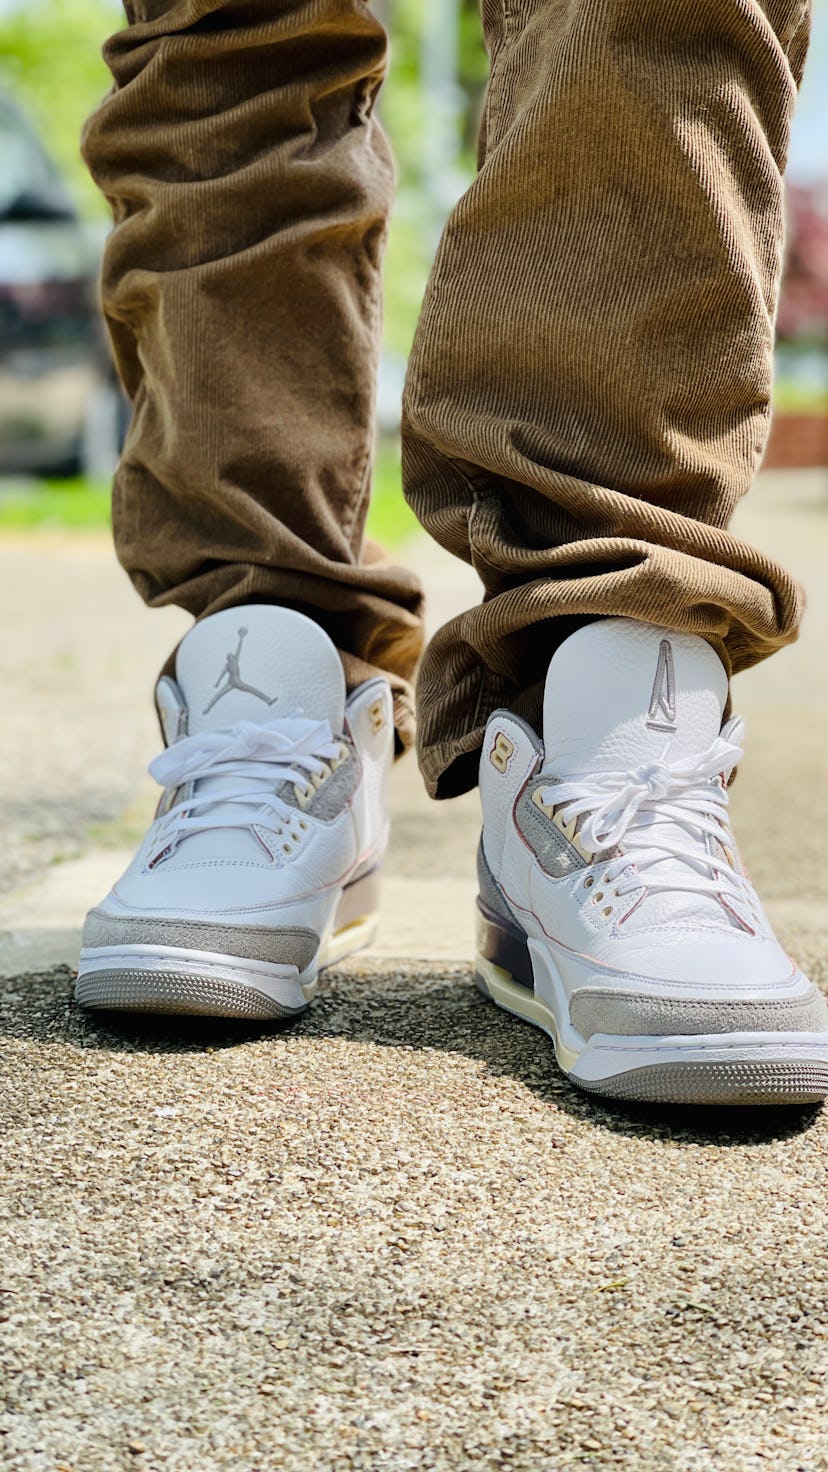 Nike Air Jordan 3 A Ma Maniére on feet review. Style. Shoes. Sneakers. Fashion. 